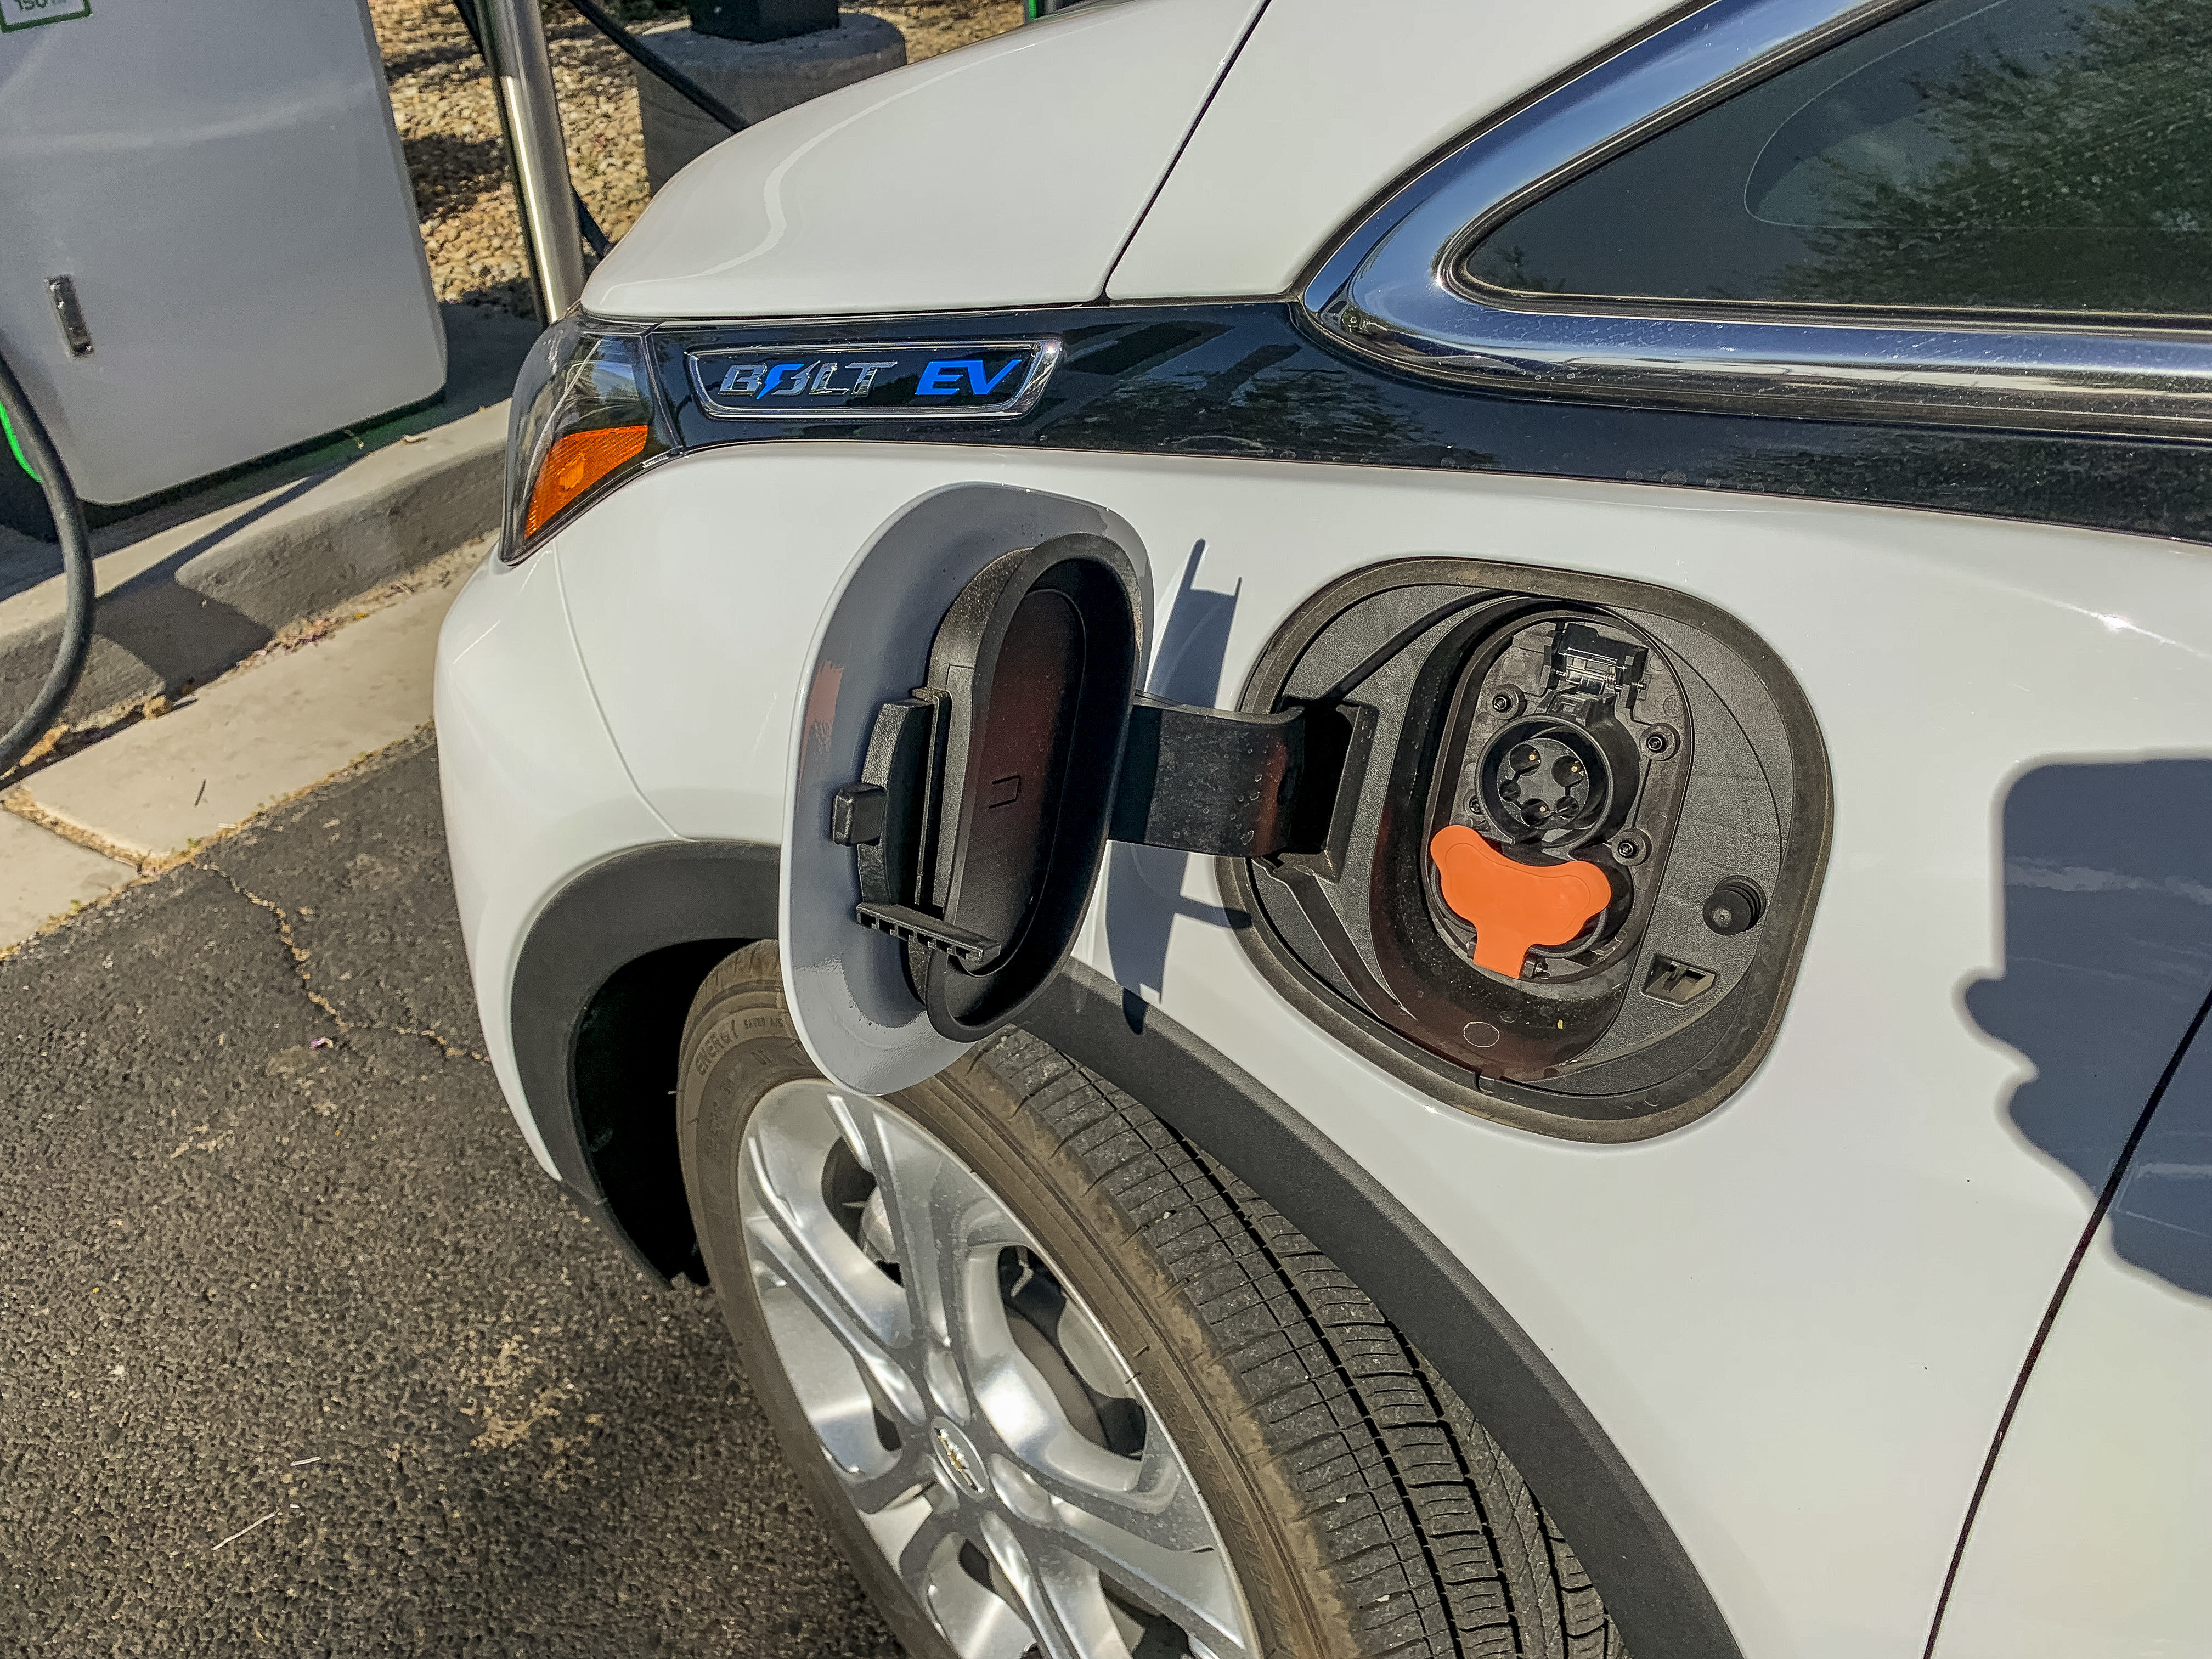 An electric vehicle with an open charge port is parked at a charging station.